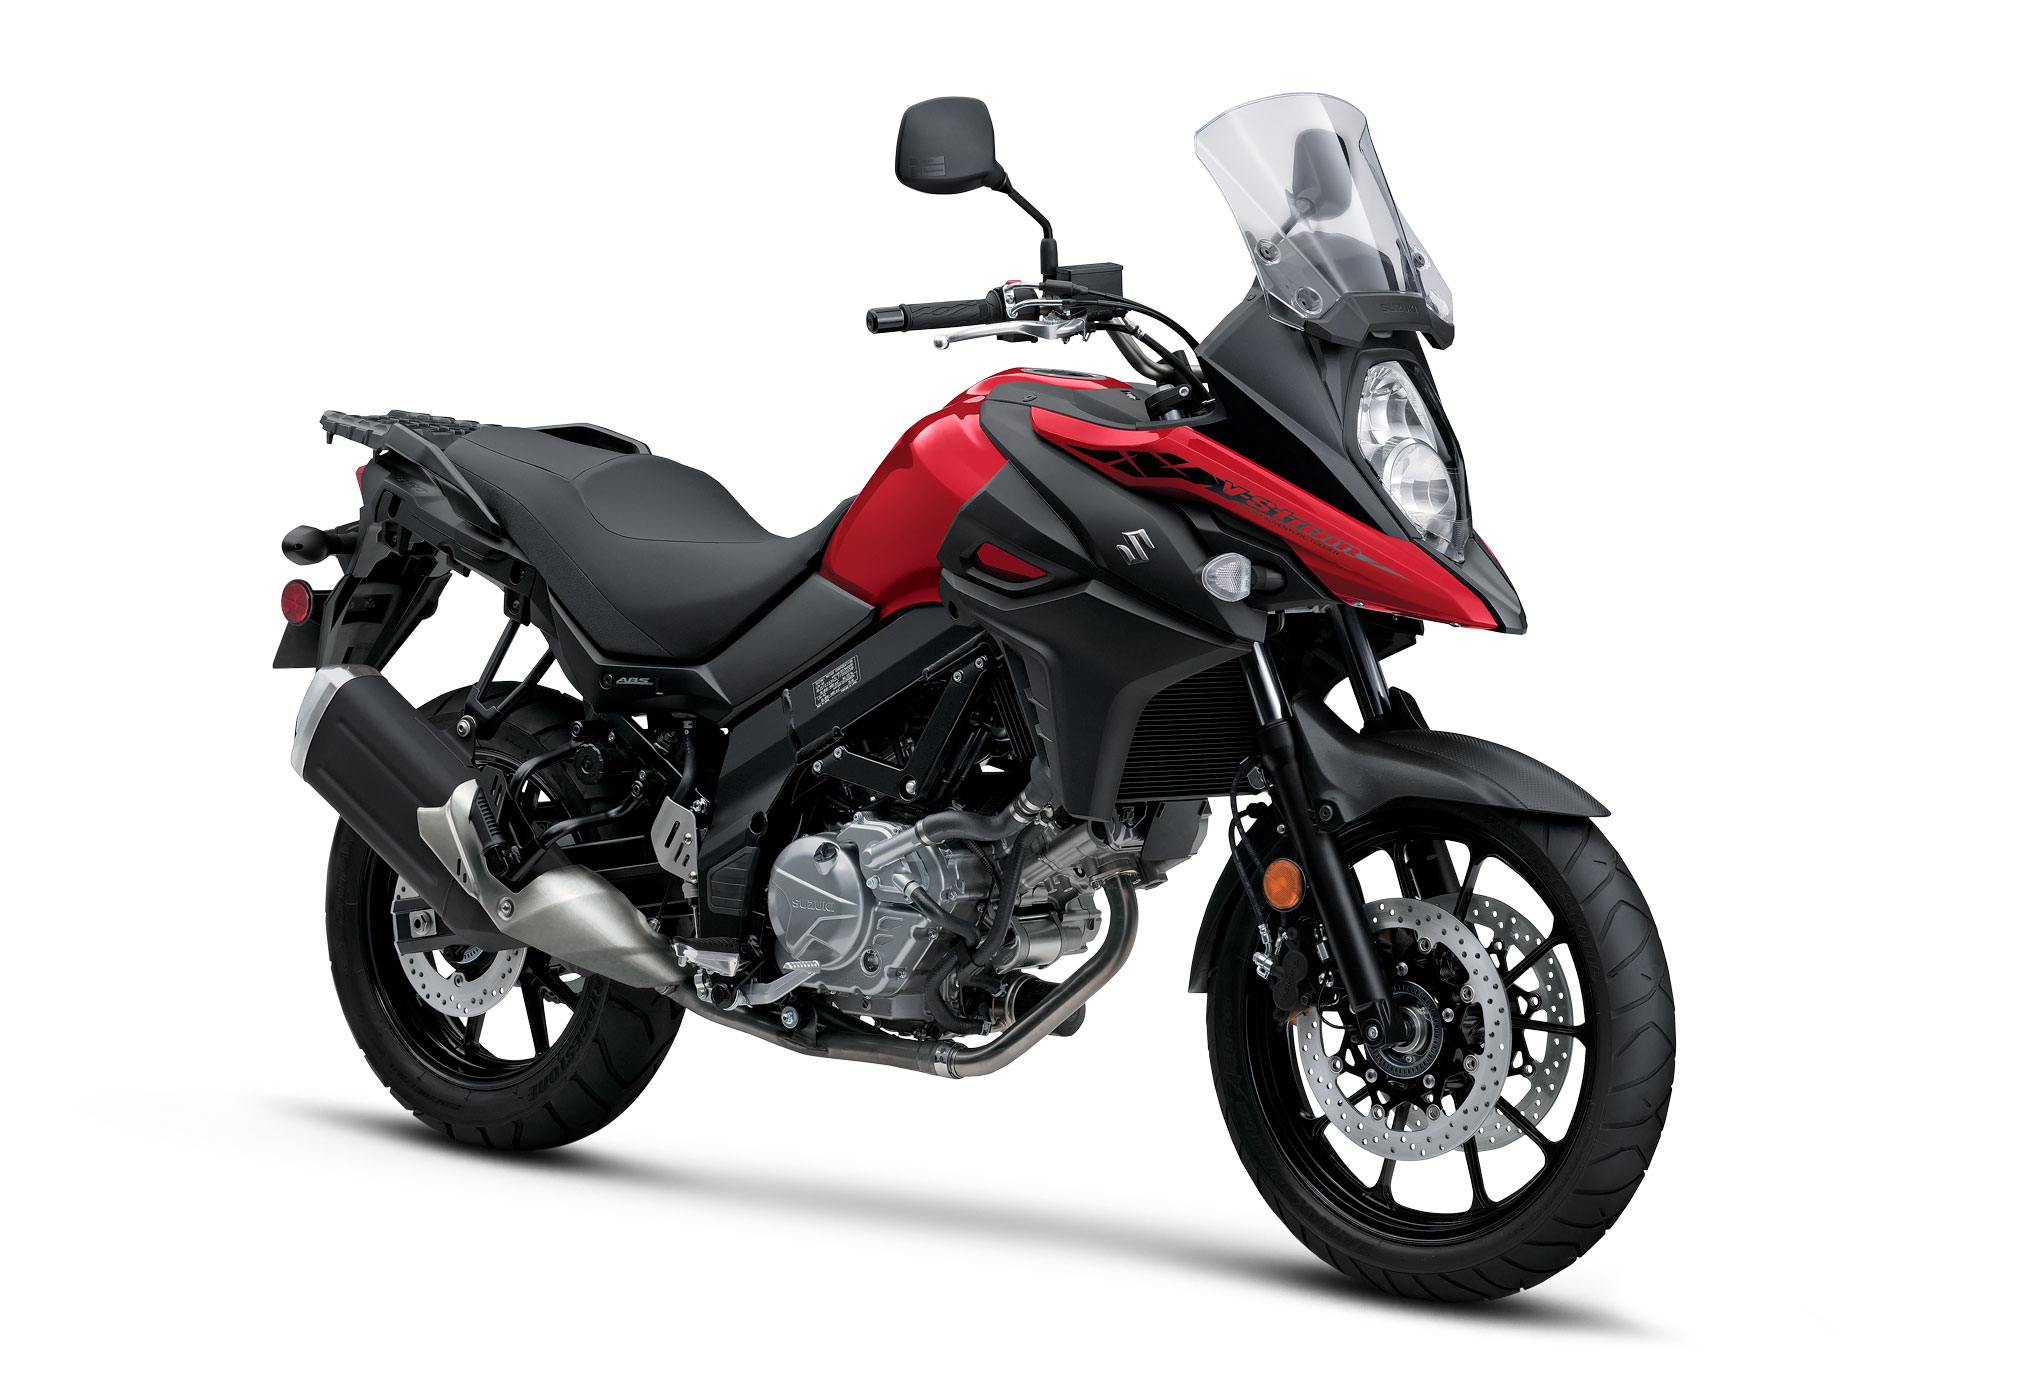 2021 Suzuki VStrom 650 ABS Guide • Total Motorcycle